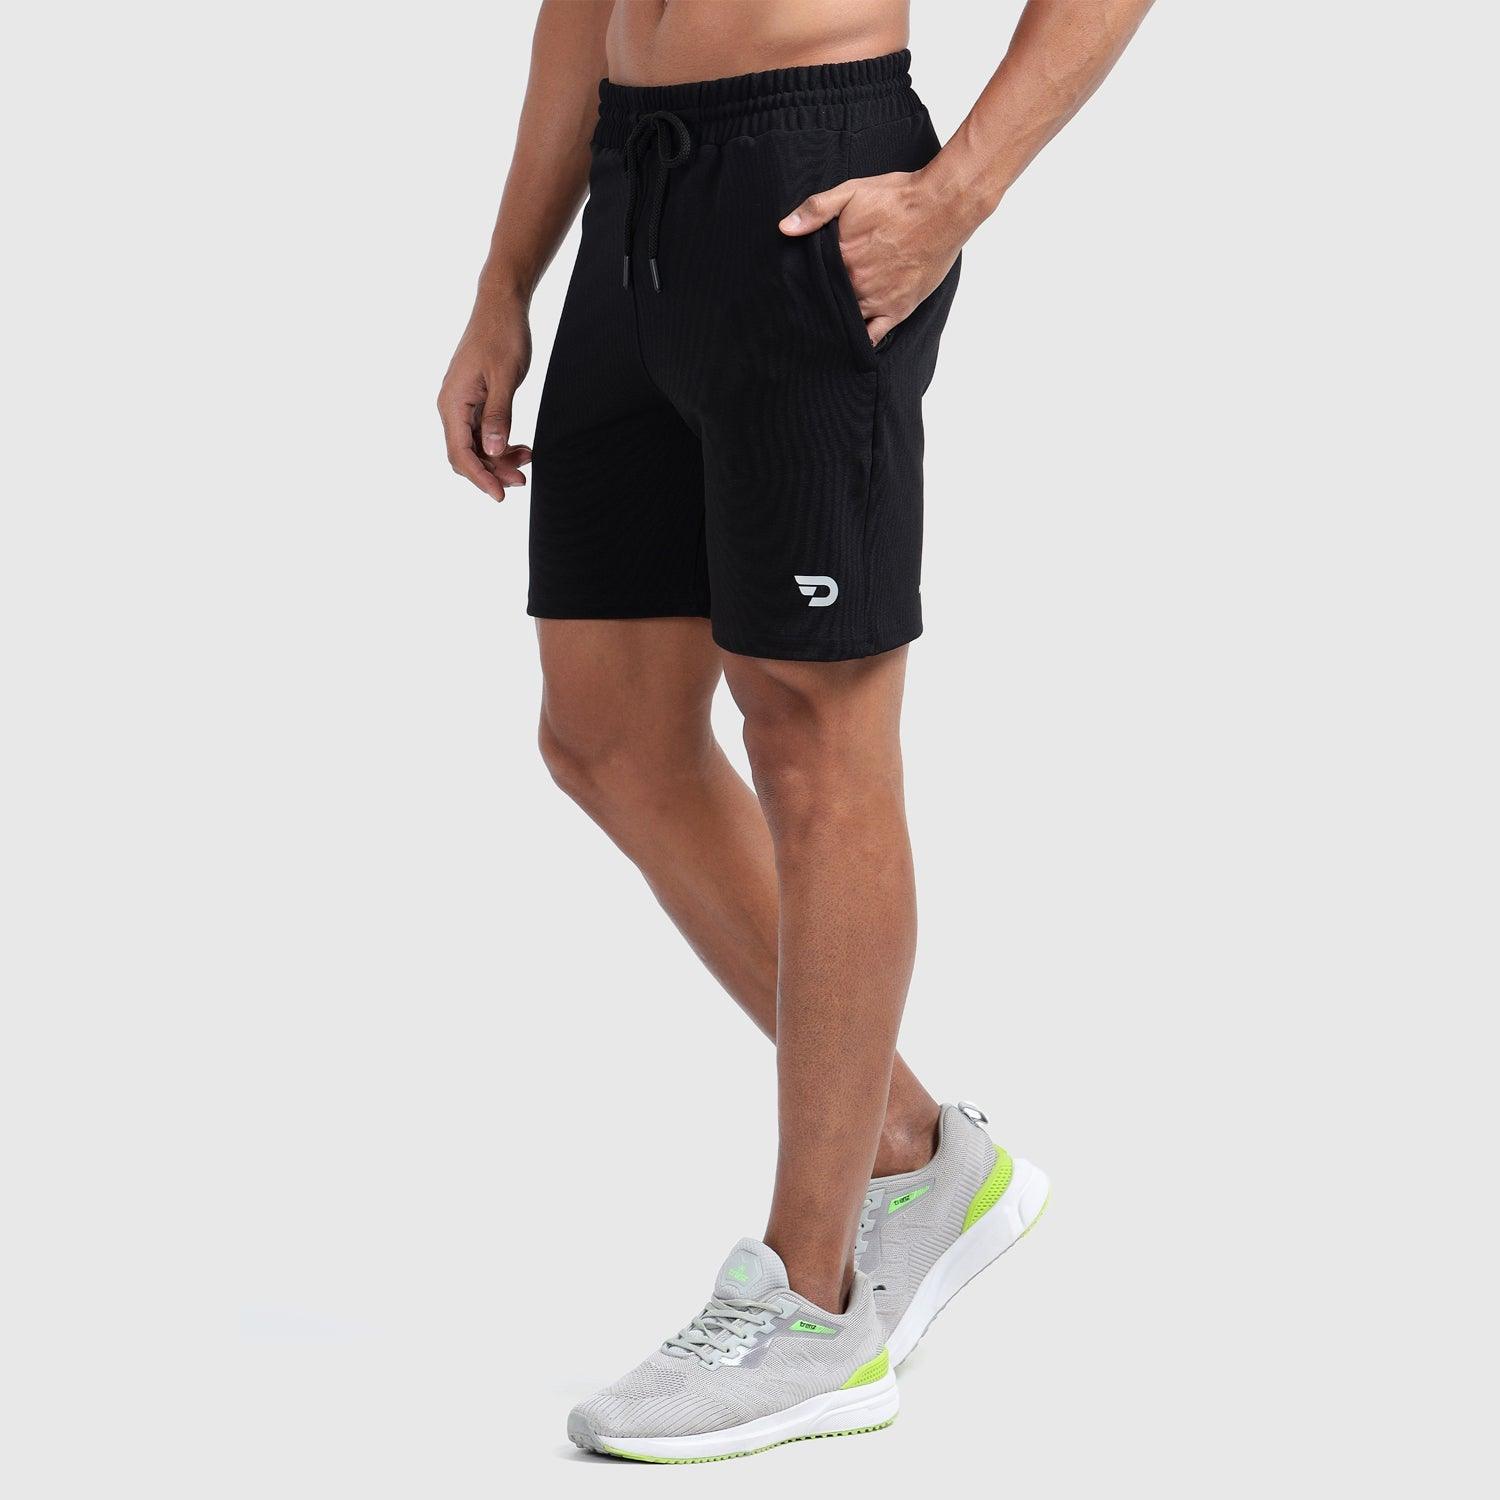 Denmonk's fashionable Trekready black shorts for men will boost your level of gym fitness.